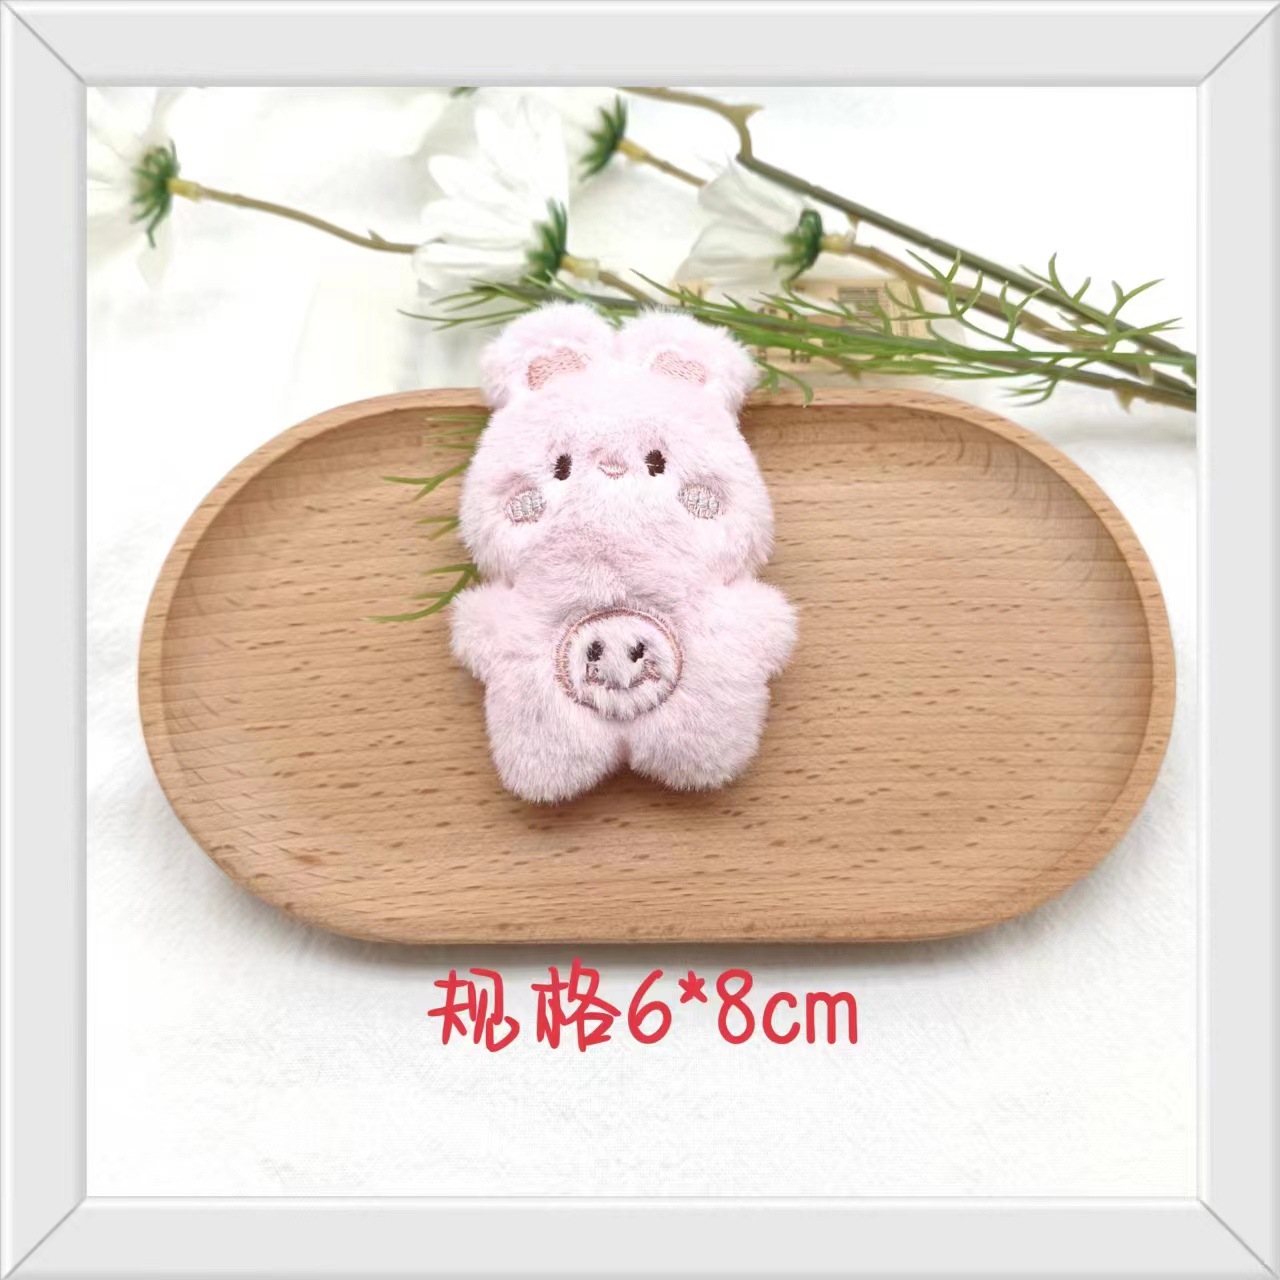 Cute Cartoon Plush Doll Brooch Children's Clothing Bag Ankle Sock Decorations Diy Phone Case Accessories